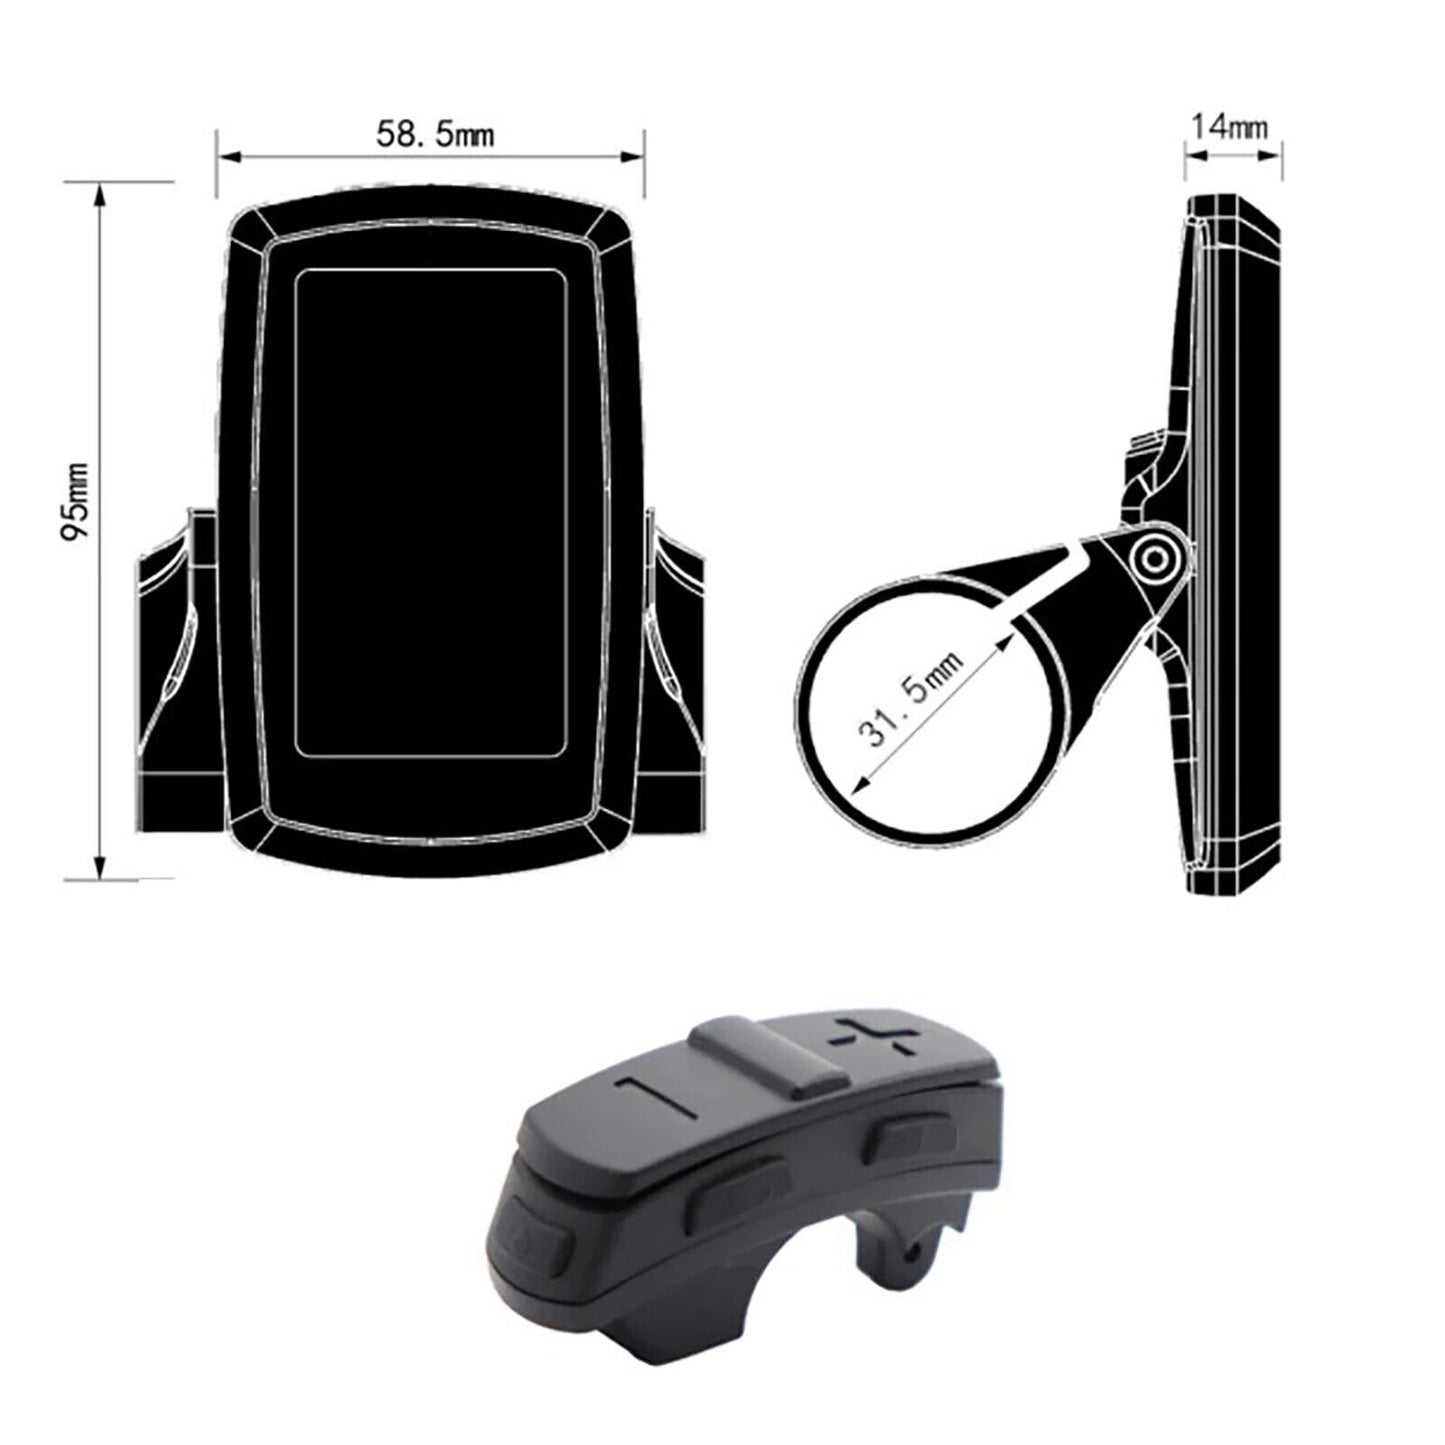 Presale - 1500W 27.5'' Inch EBike Bicycle Conversion Kit 48V, Samsung Cell 20A Battery